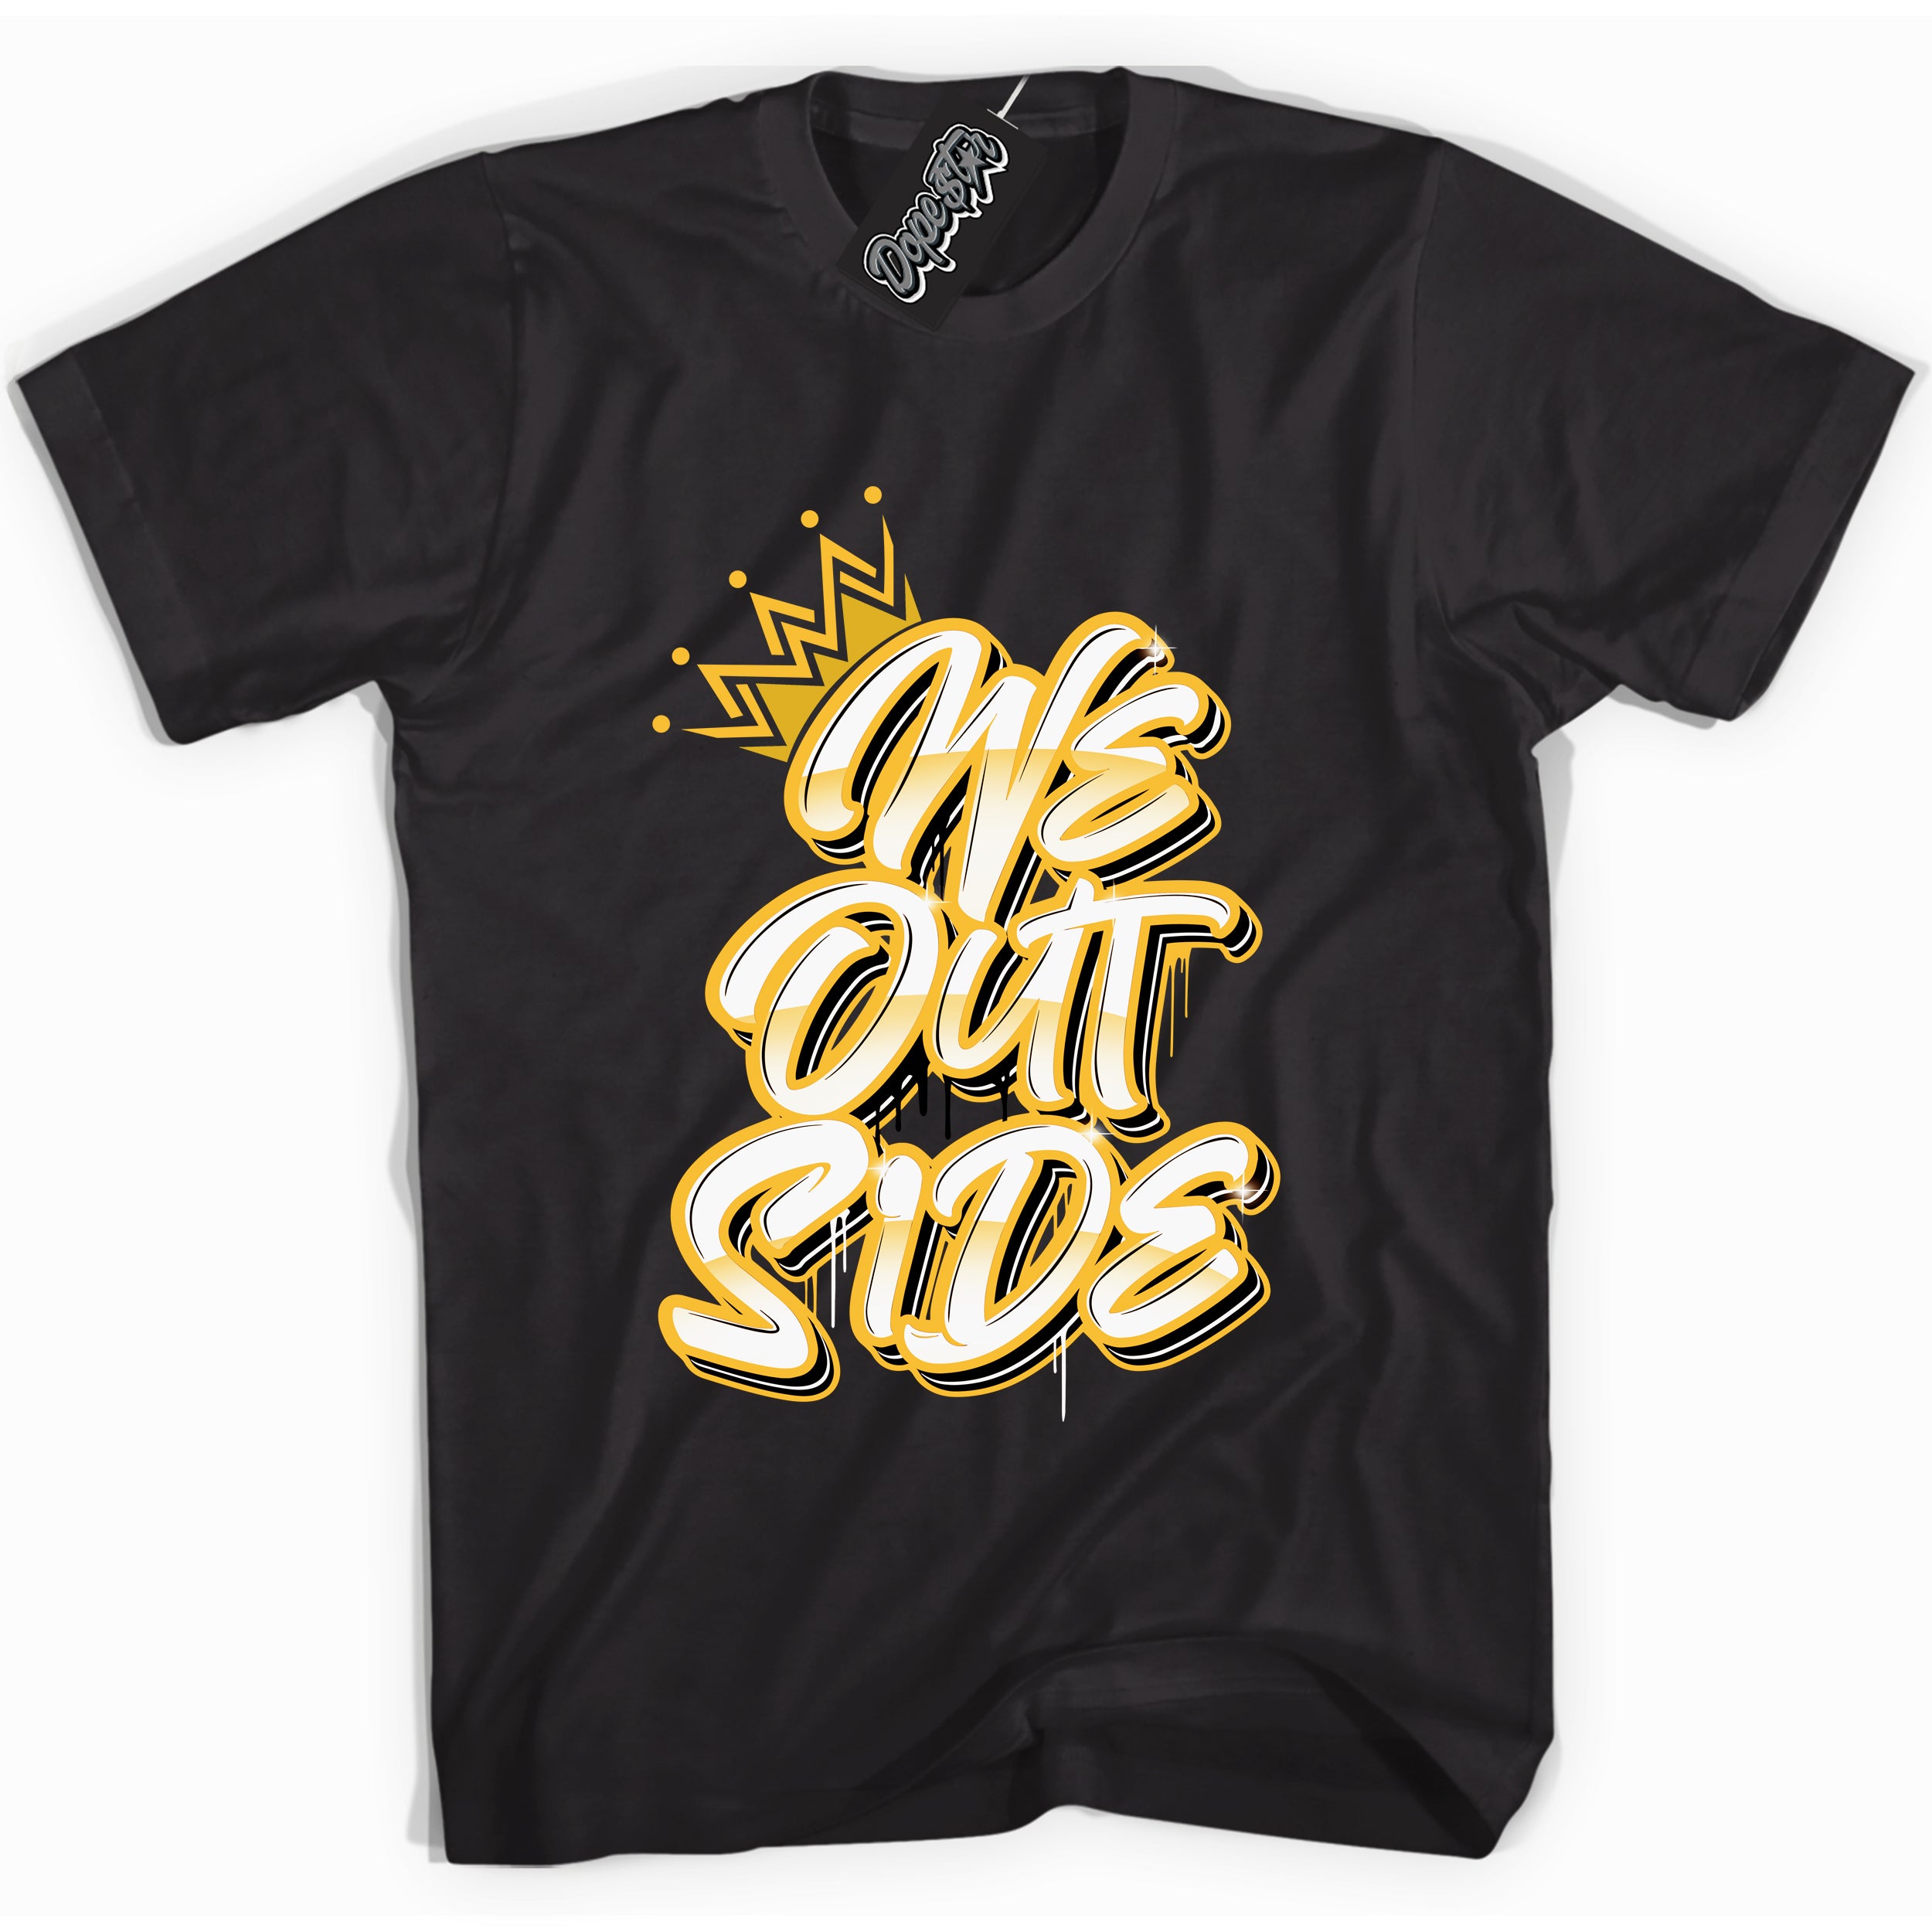 Cool black Shirt with “ We Outside” design that perfectly matches Yellow Ochre 6s Sneakers.